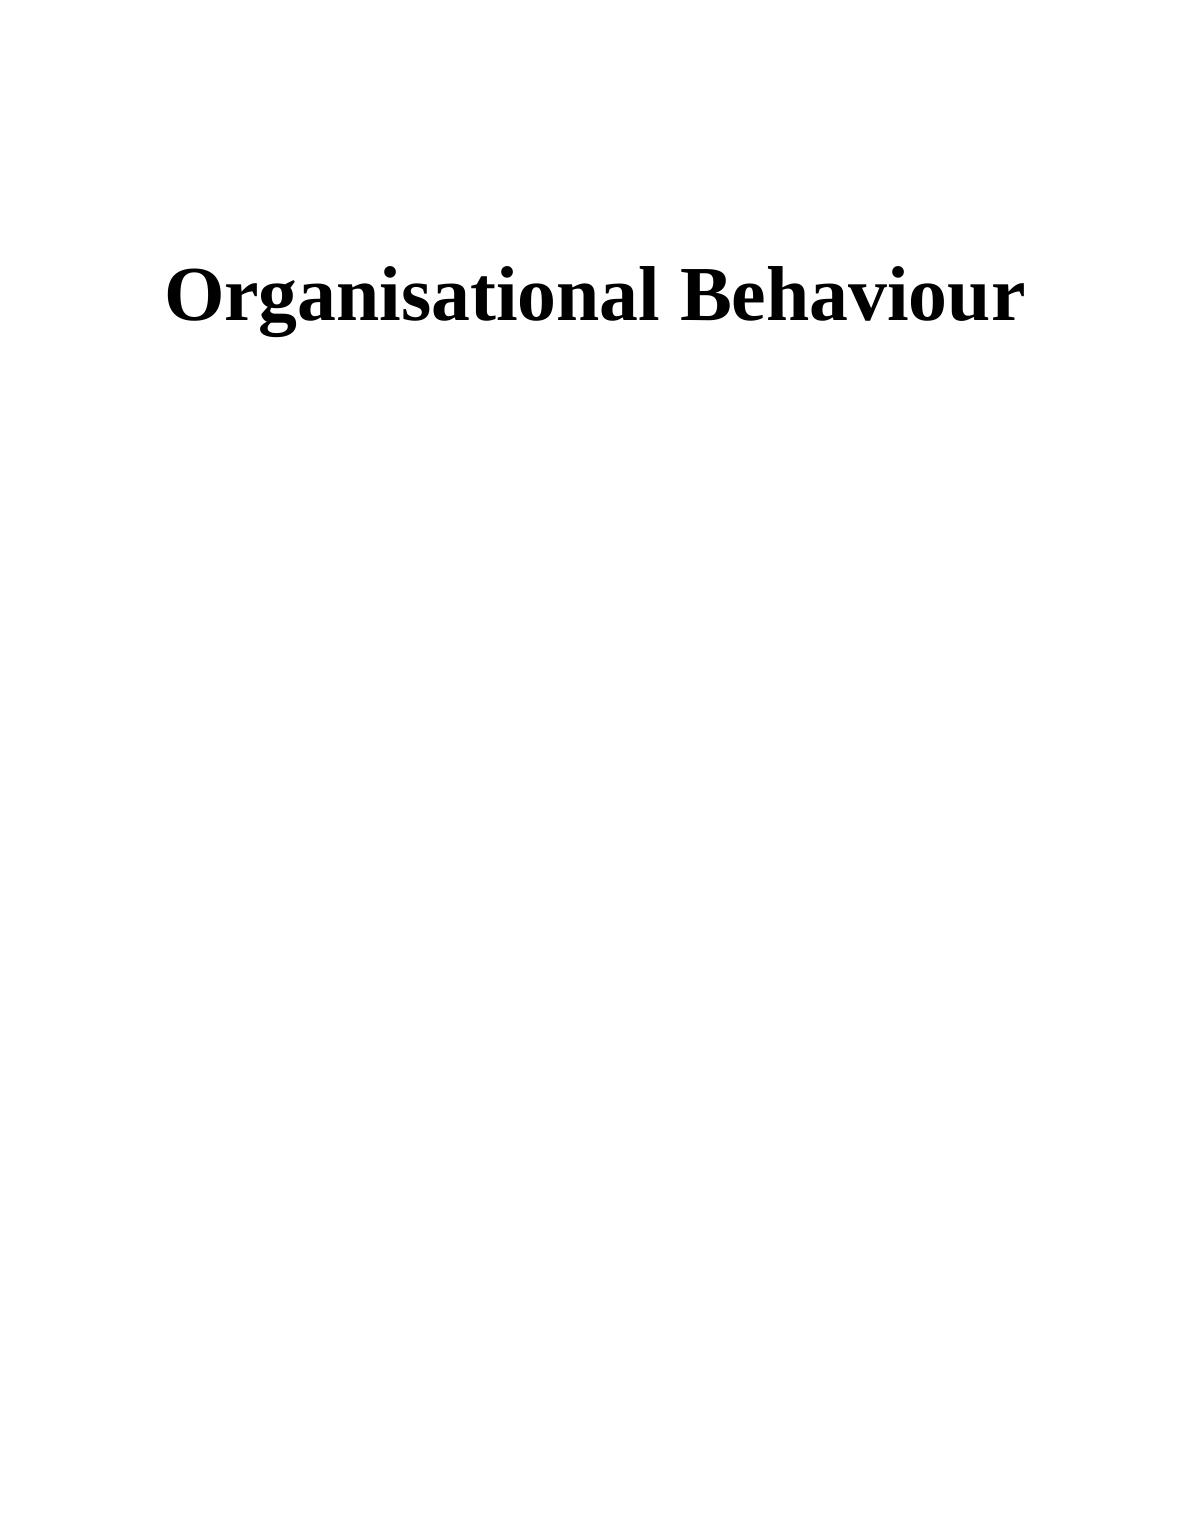 P4 Apply concepts and philosophies of organisational behaviour (Doc)_1